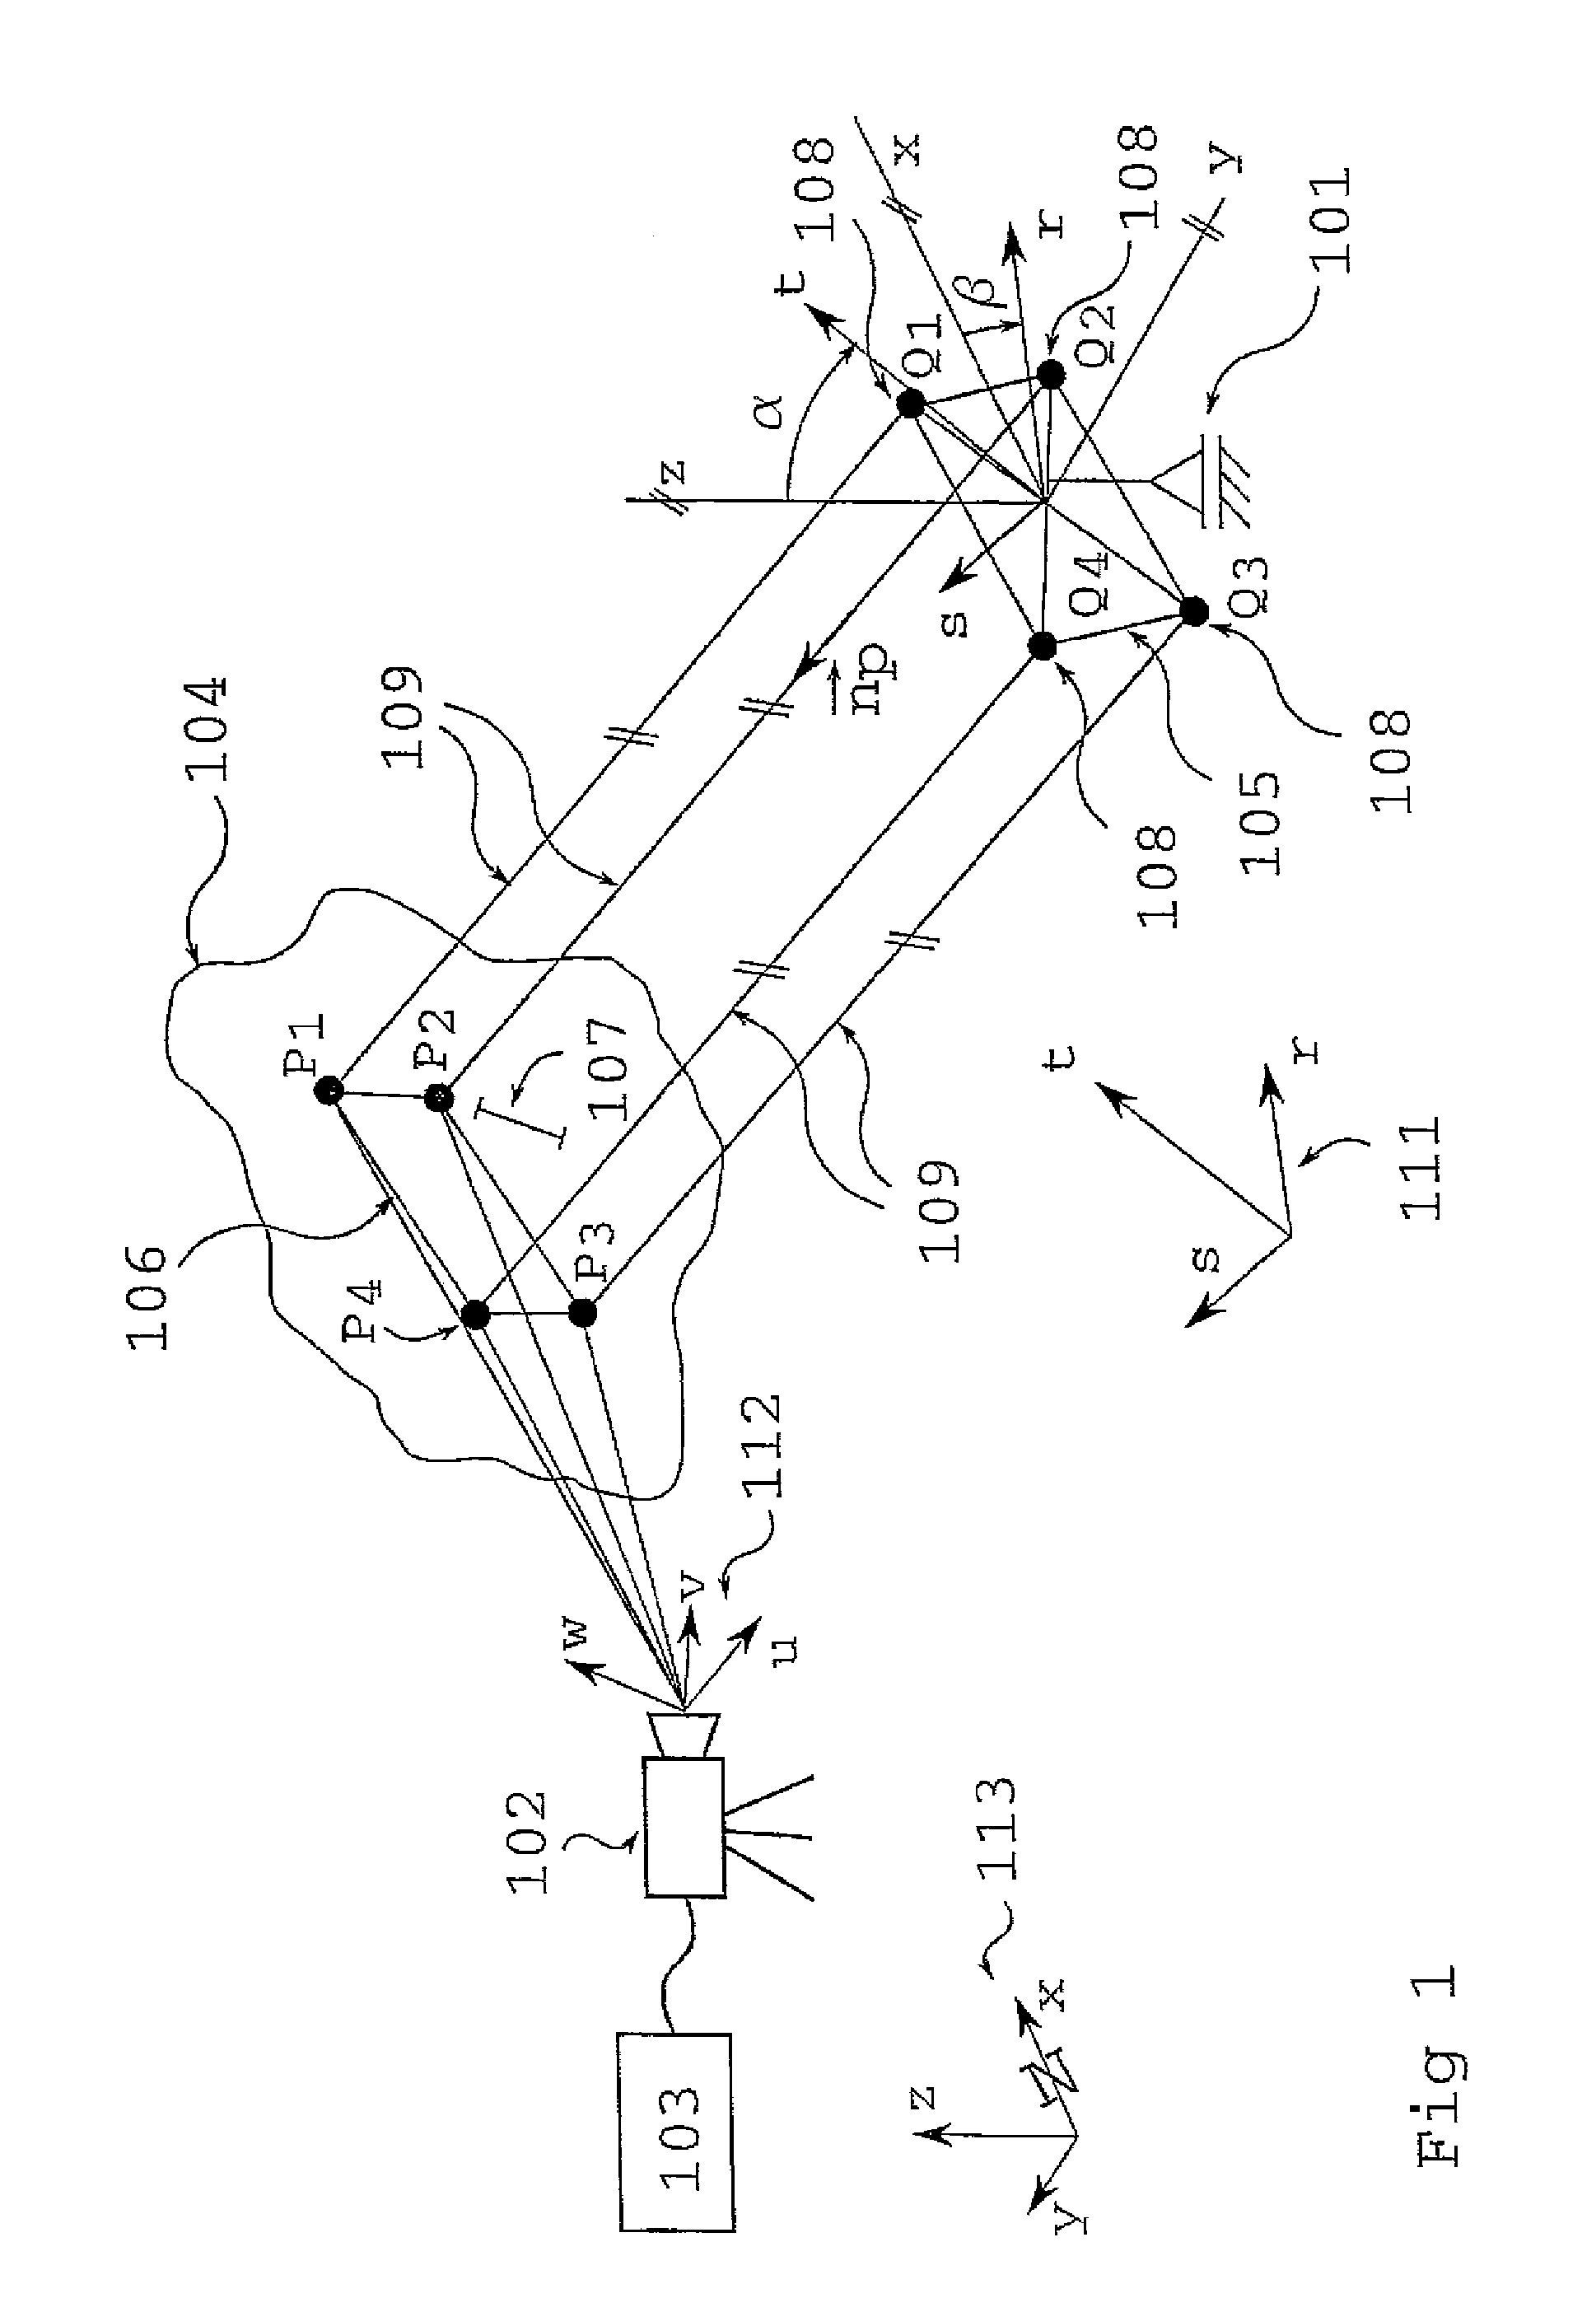 Mobile projection system for scaling and orientation of surfaces surveyed by an optical measuring system